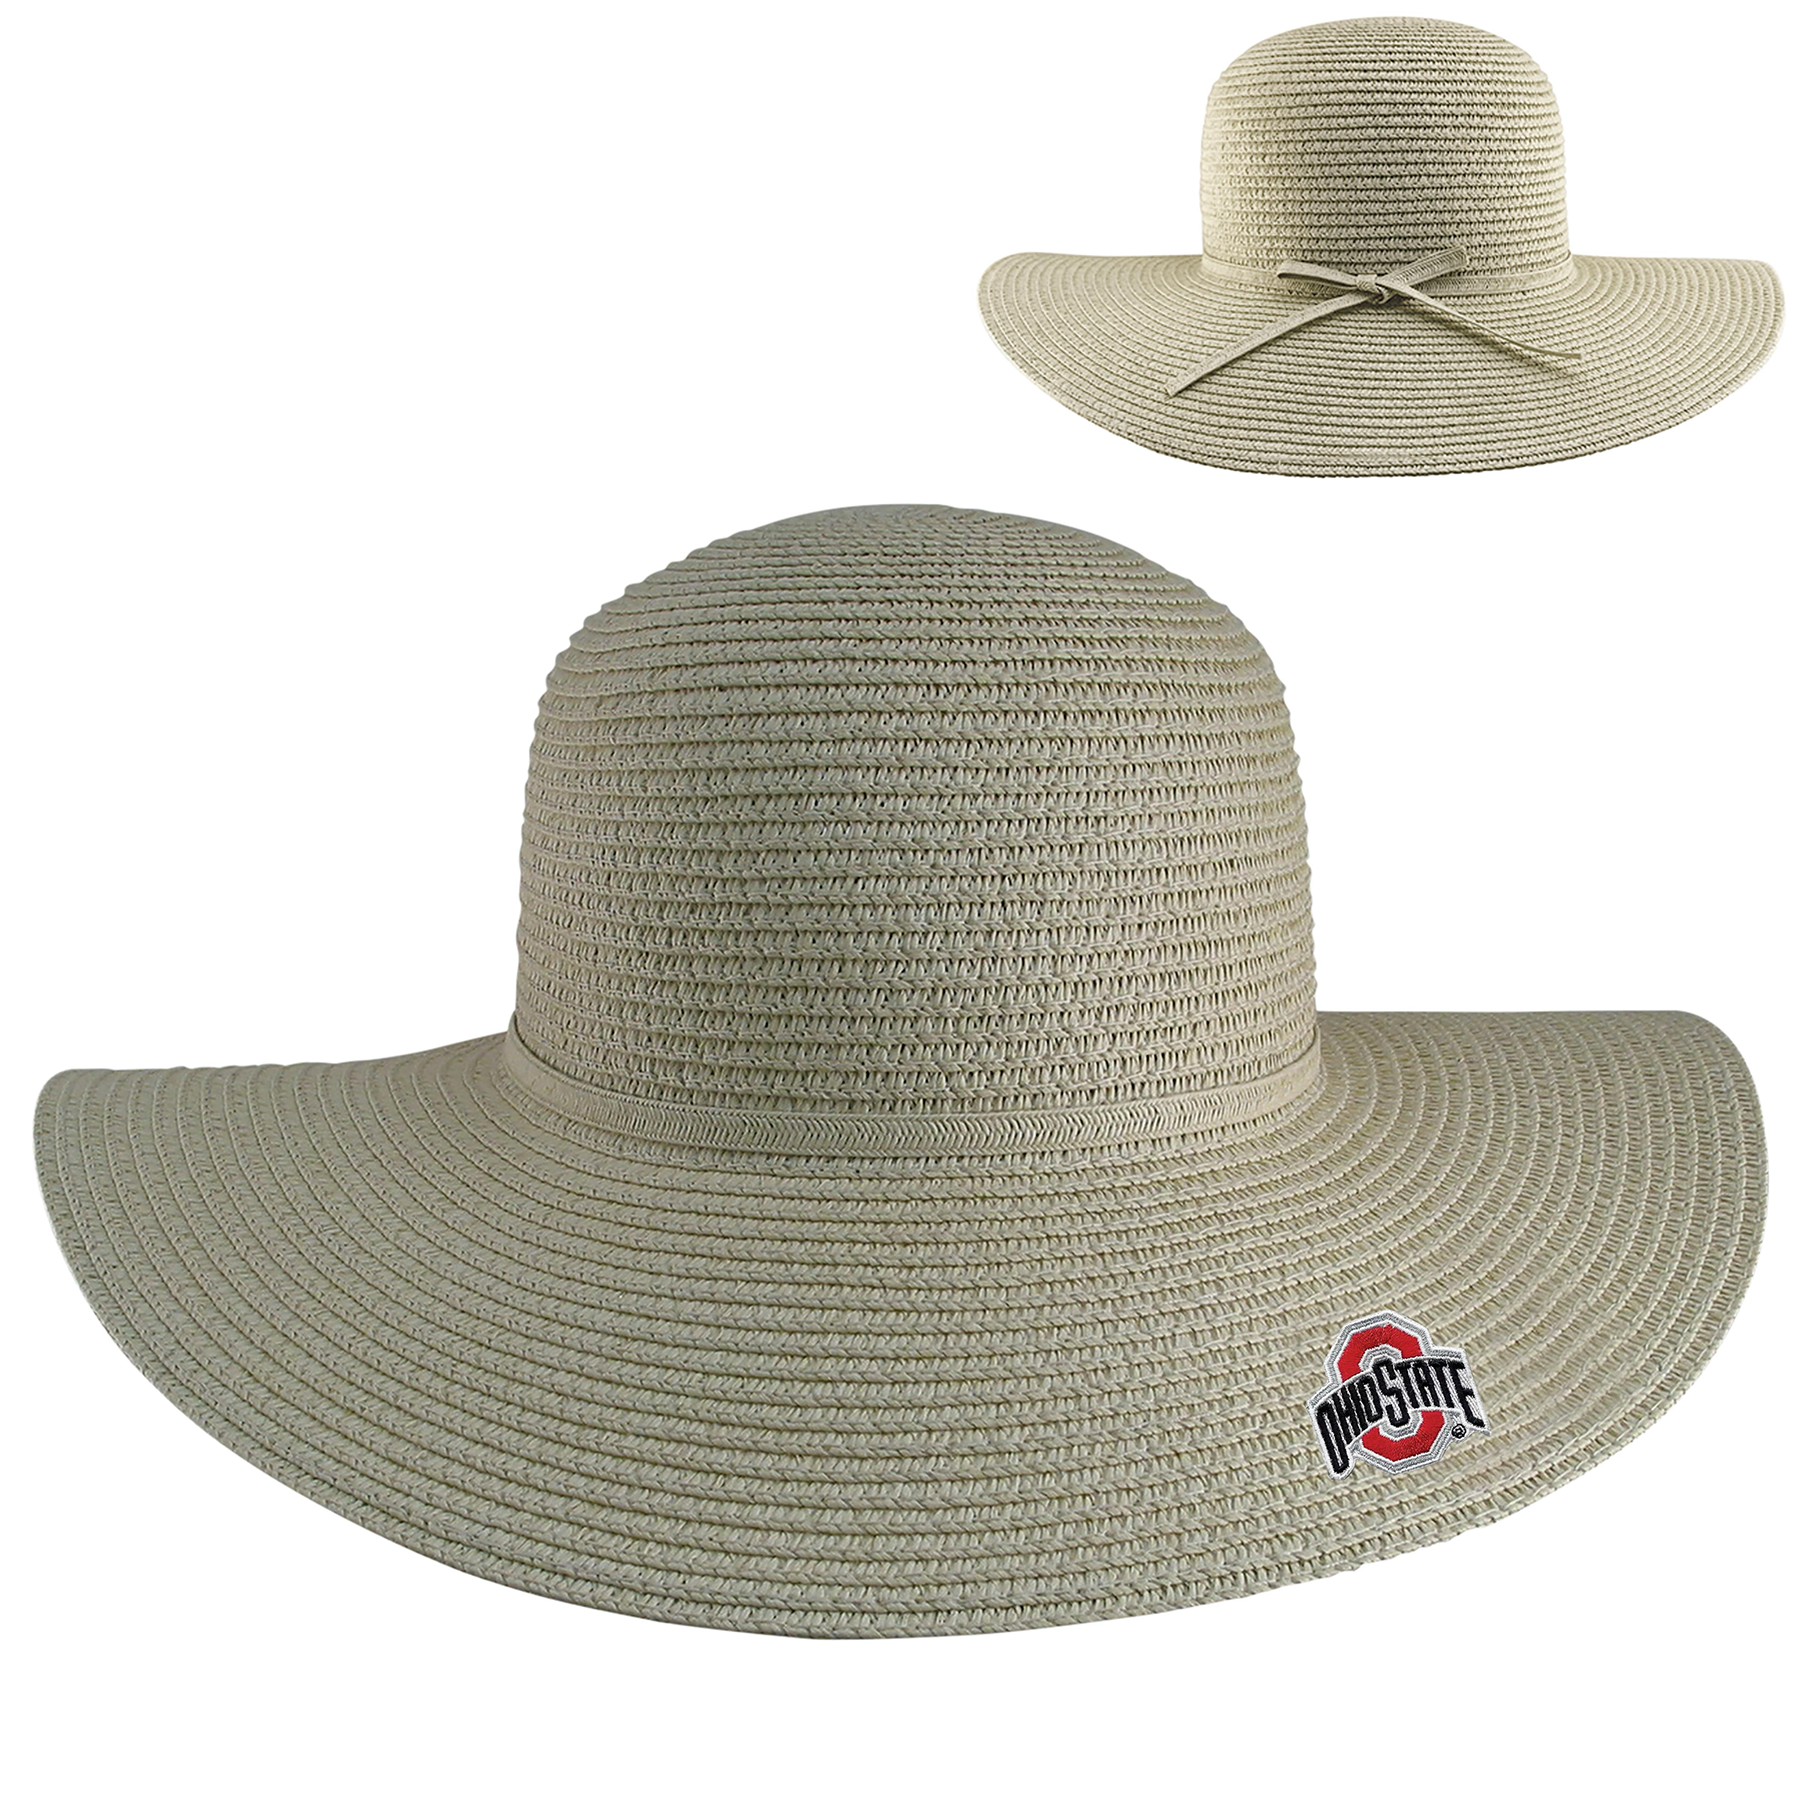 Introducing the Ohio State Madeline's Women's Woven Wide Brim Sun Hat with Athletic Logo, the perfect accessory to showcase your Buckeye pride while staying stylish under the sun!